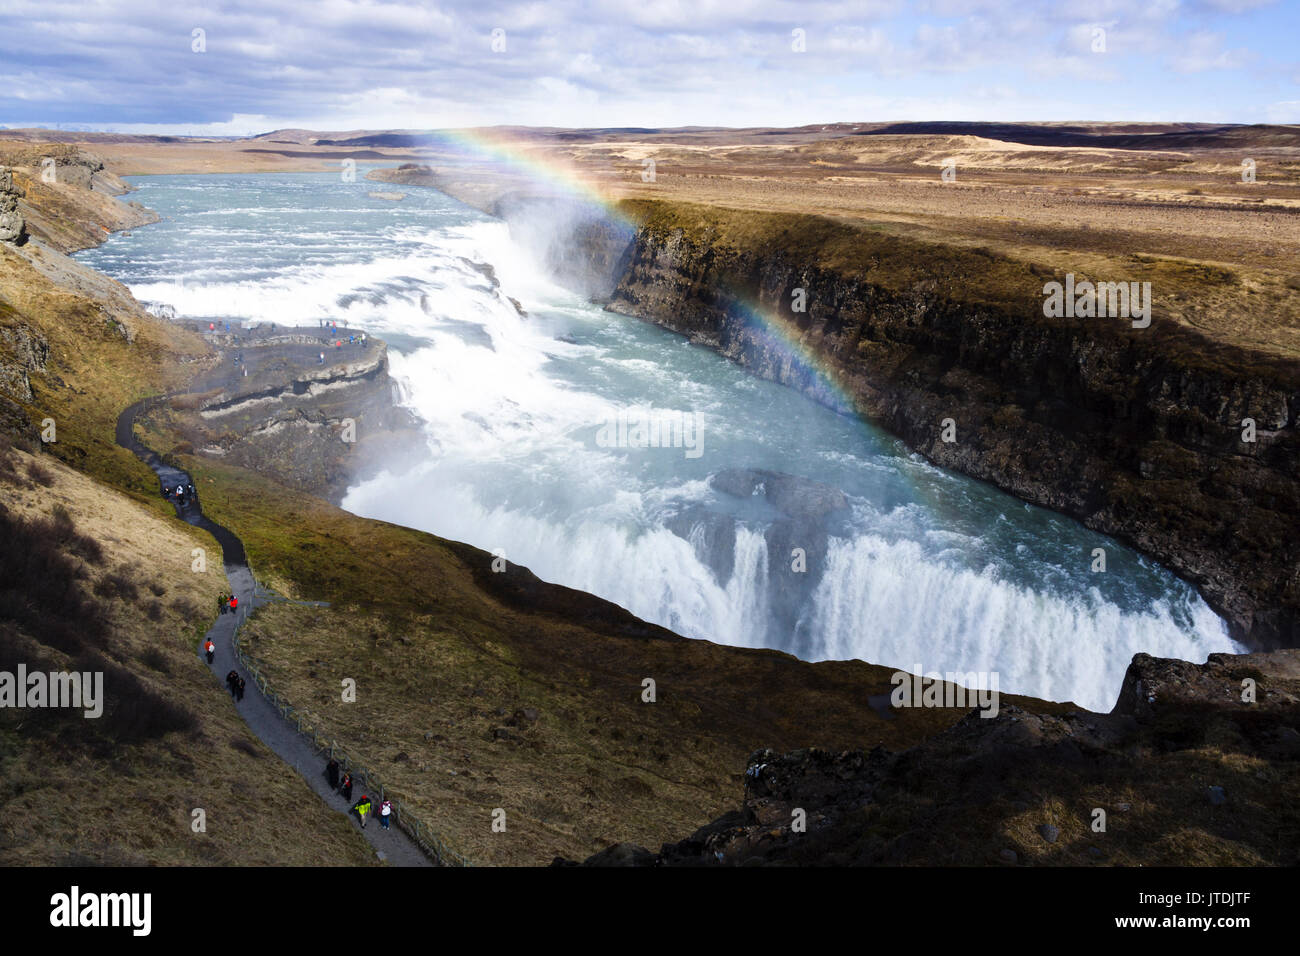 Gullfoss ("Golden Falls") is a waterfall located in the canyon of the Hvítá river in southwest Iceland. Stock Photo